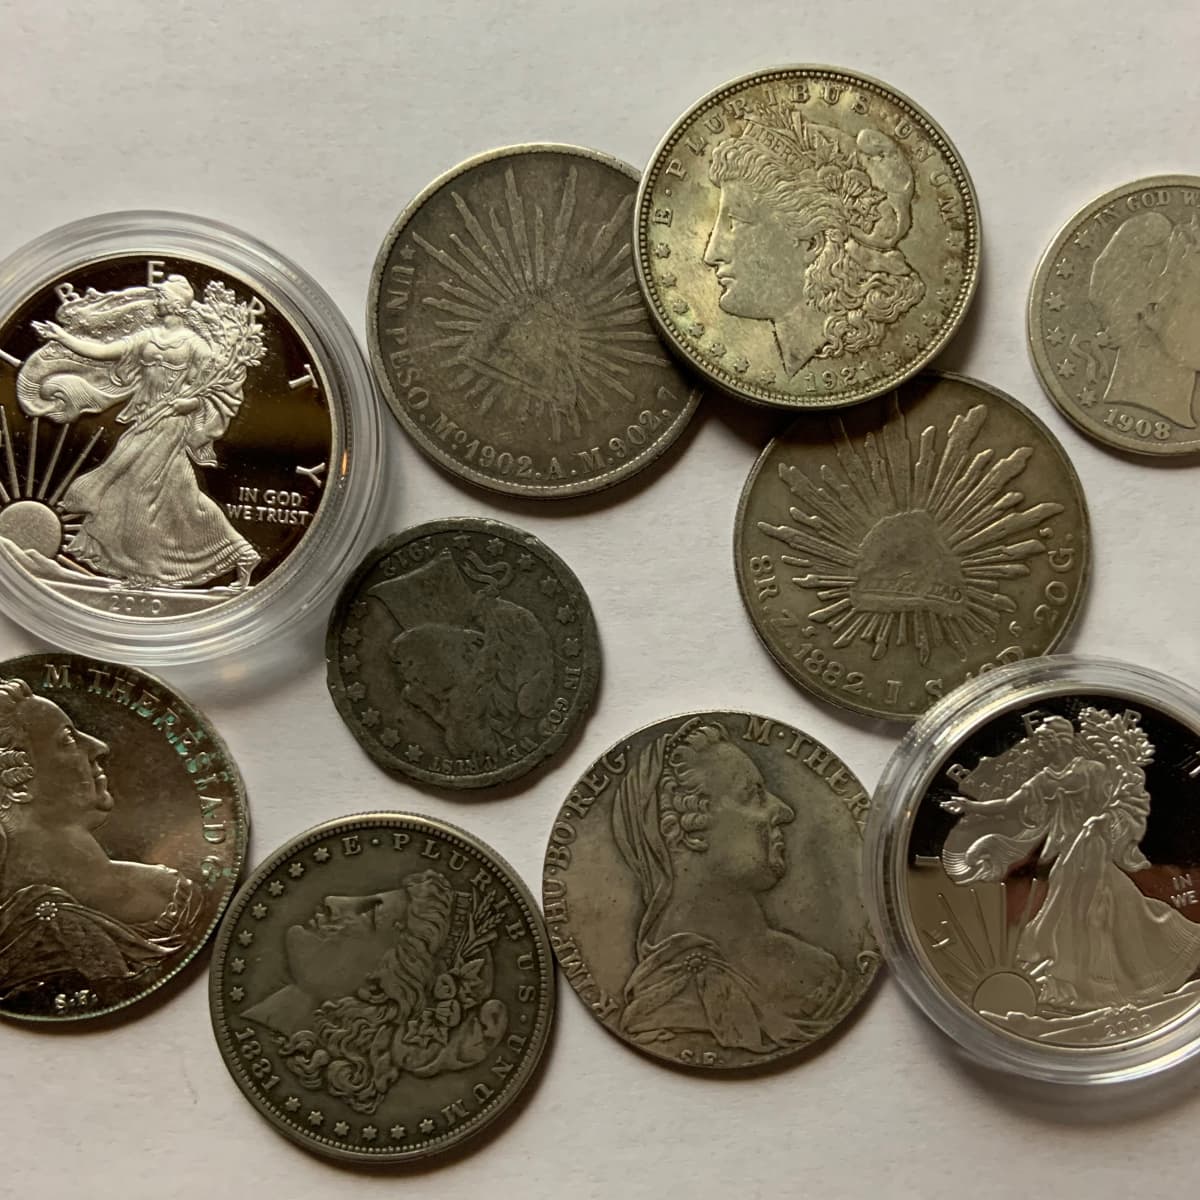 How To Tell If A Coin Is Counterfeit